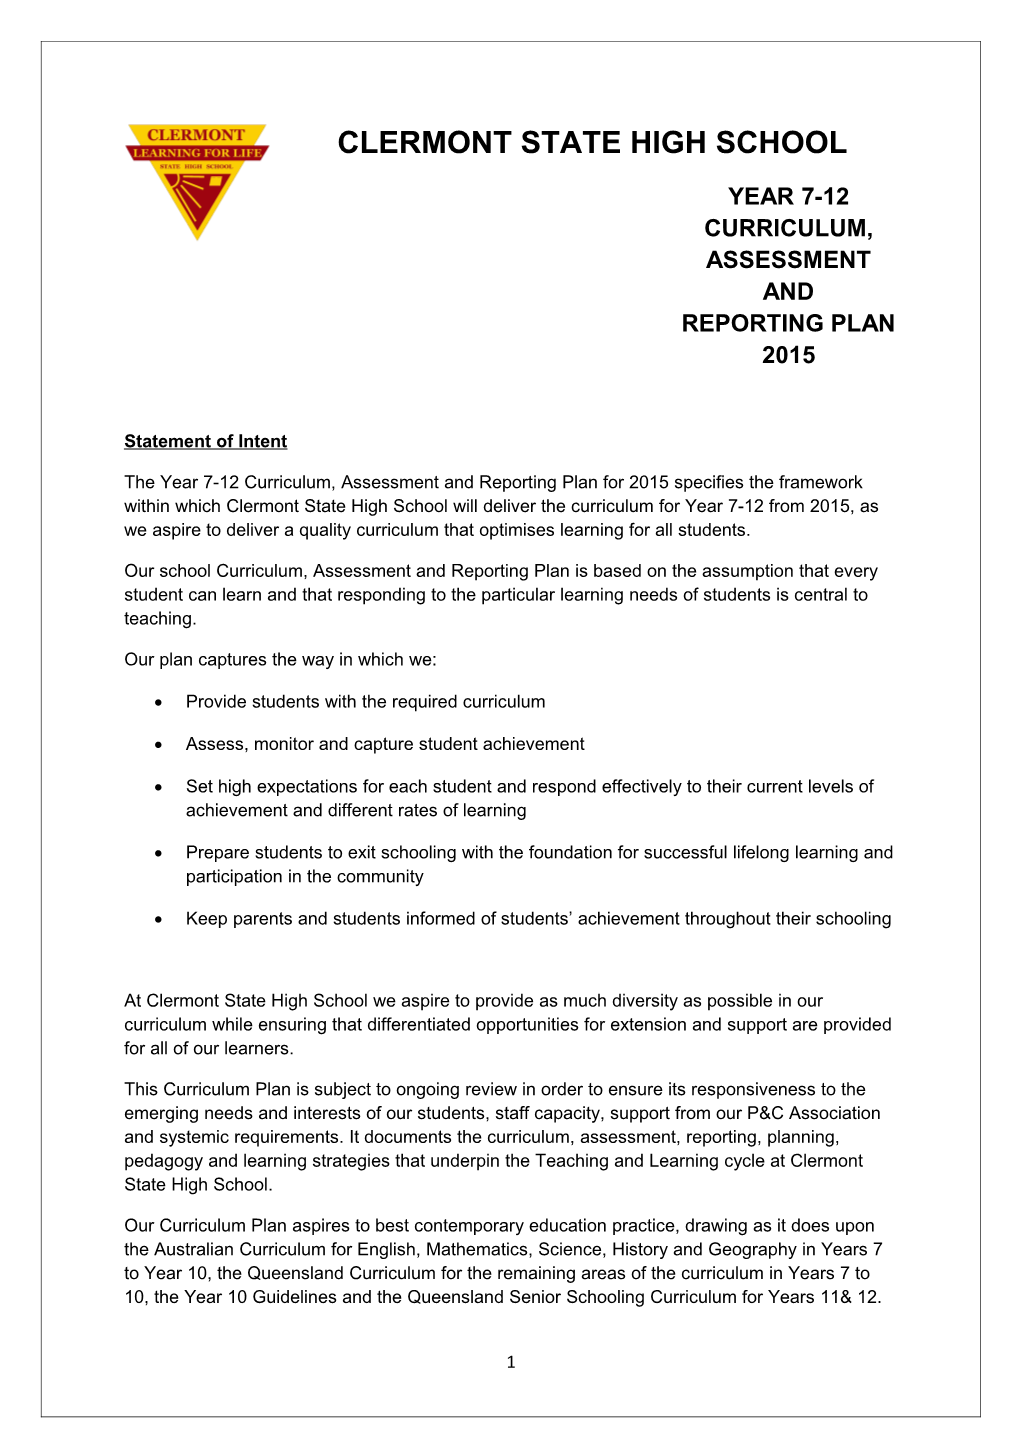 Year 7-12Curriculum, Assessment and Reporting Plan 2015